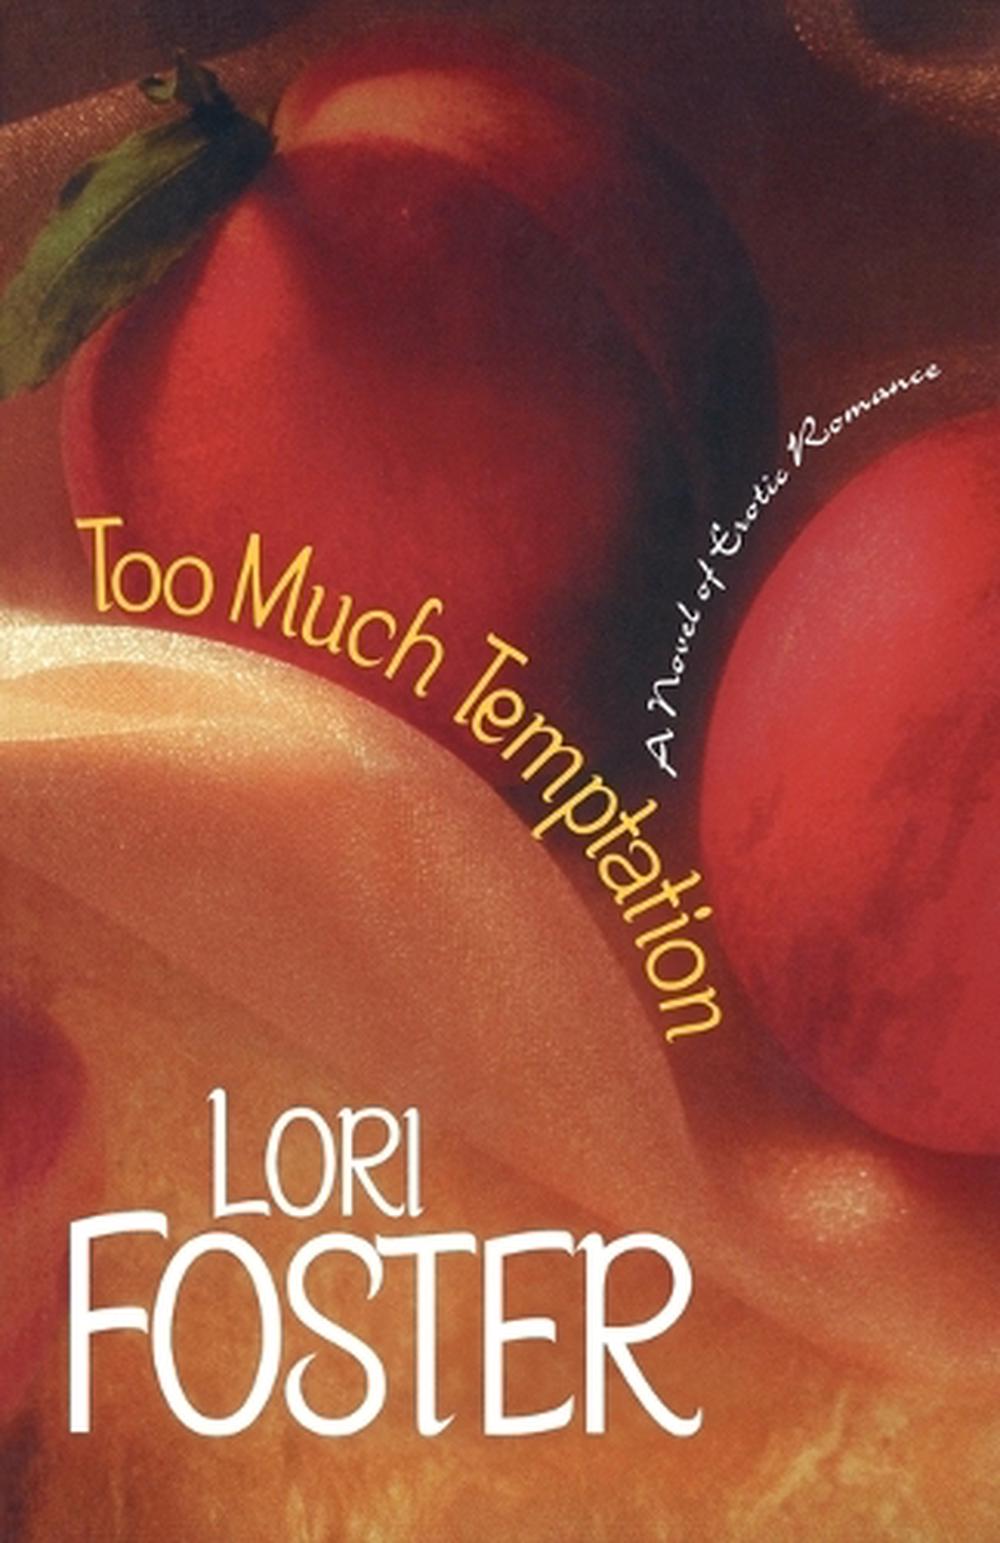 too much temptation by lori foster